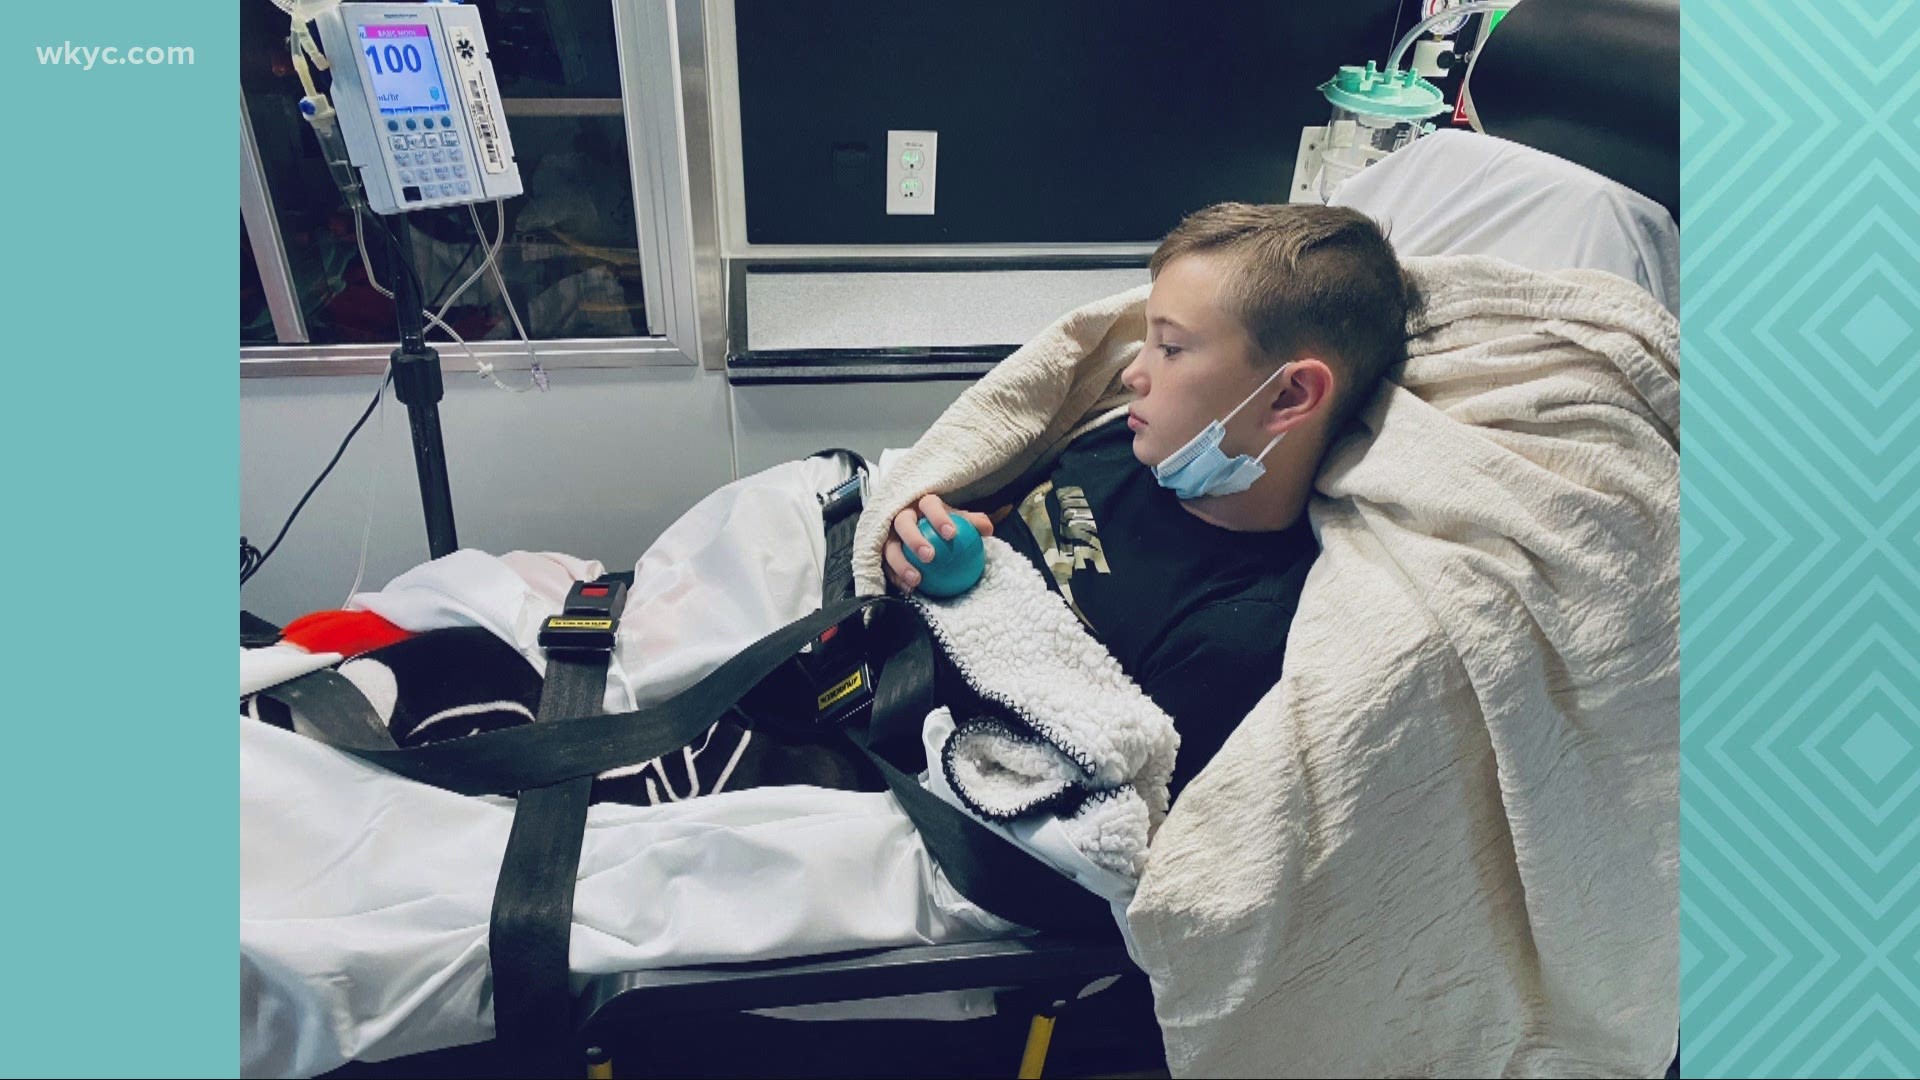 Owen Caswell will celebrate his 11th birthday on March 22, but he's stuck at home as he recovers from Multisystem Inflammatory Syndrome in Children.